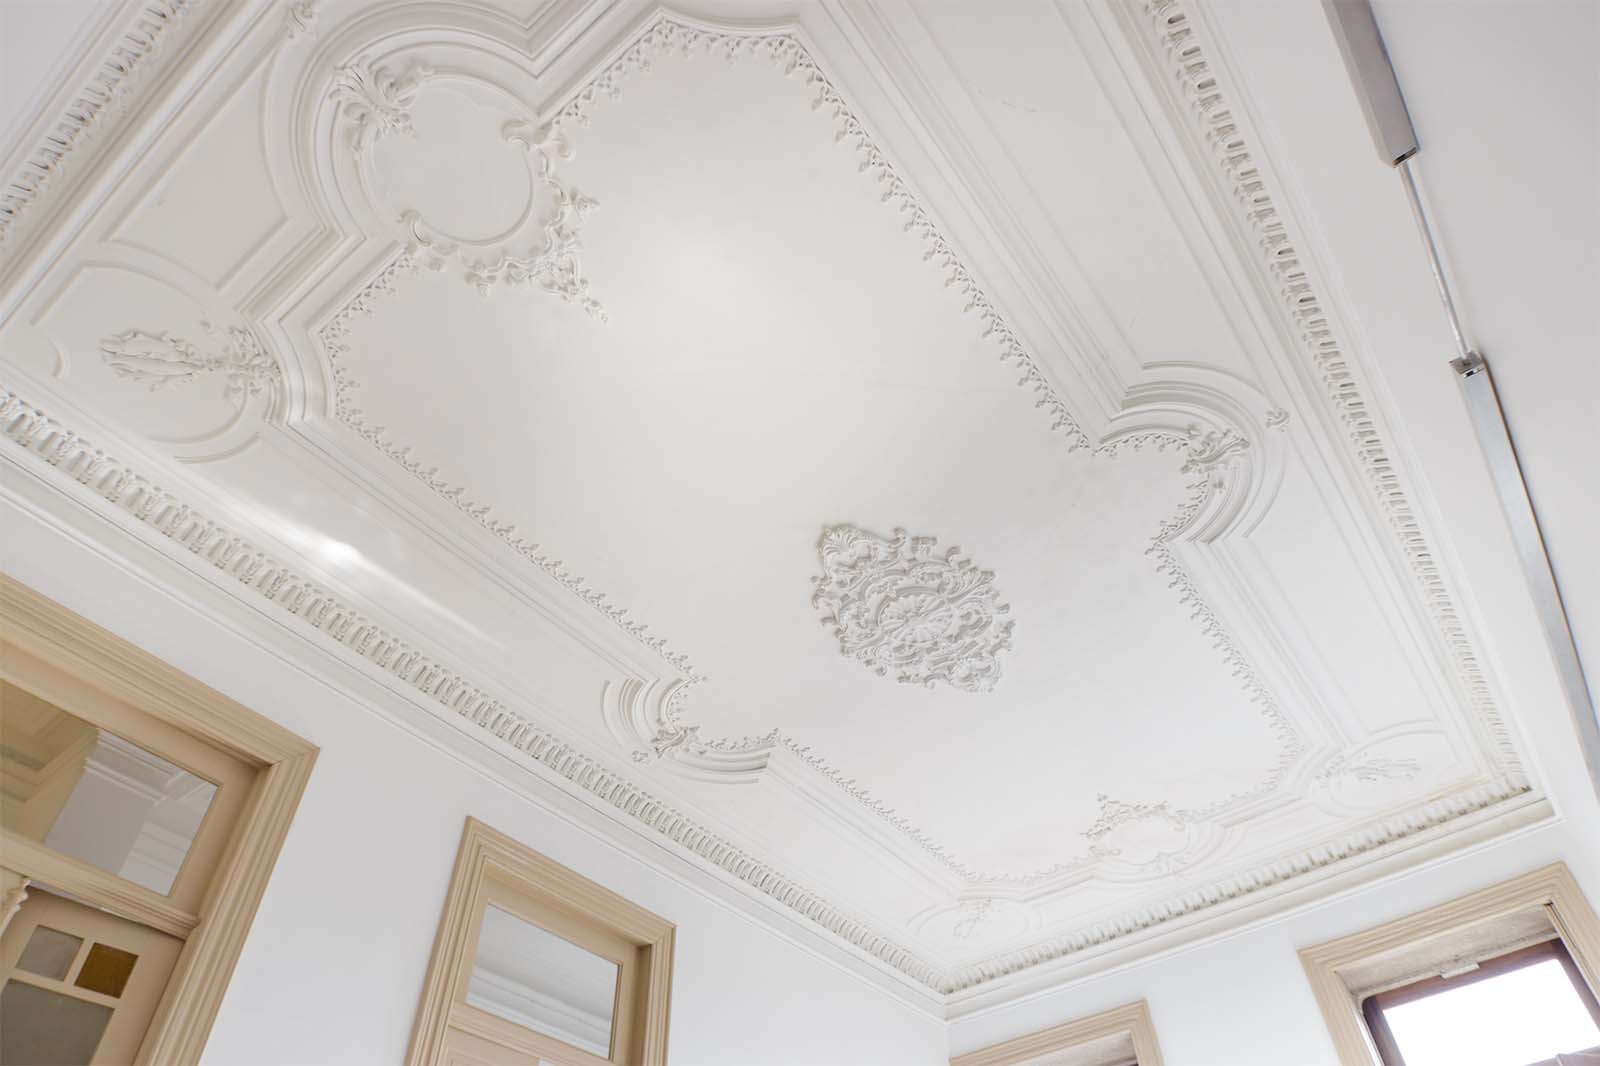 Decorative Plaster Cornice Installation In A Heritage Home Entry In Cairns